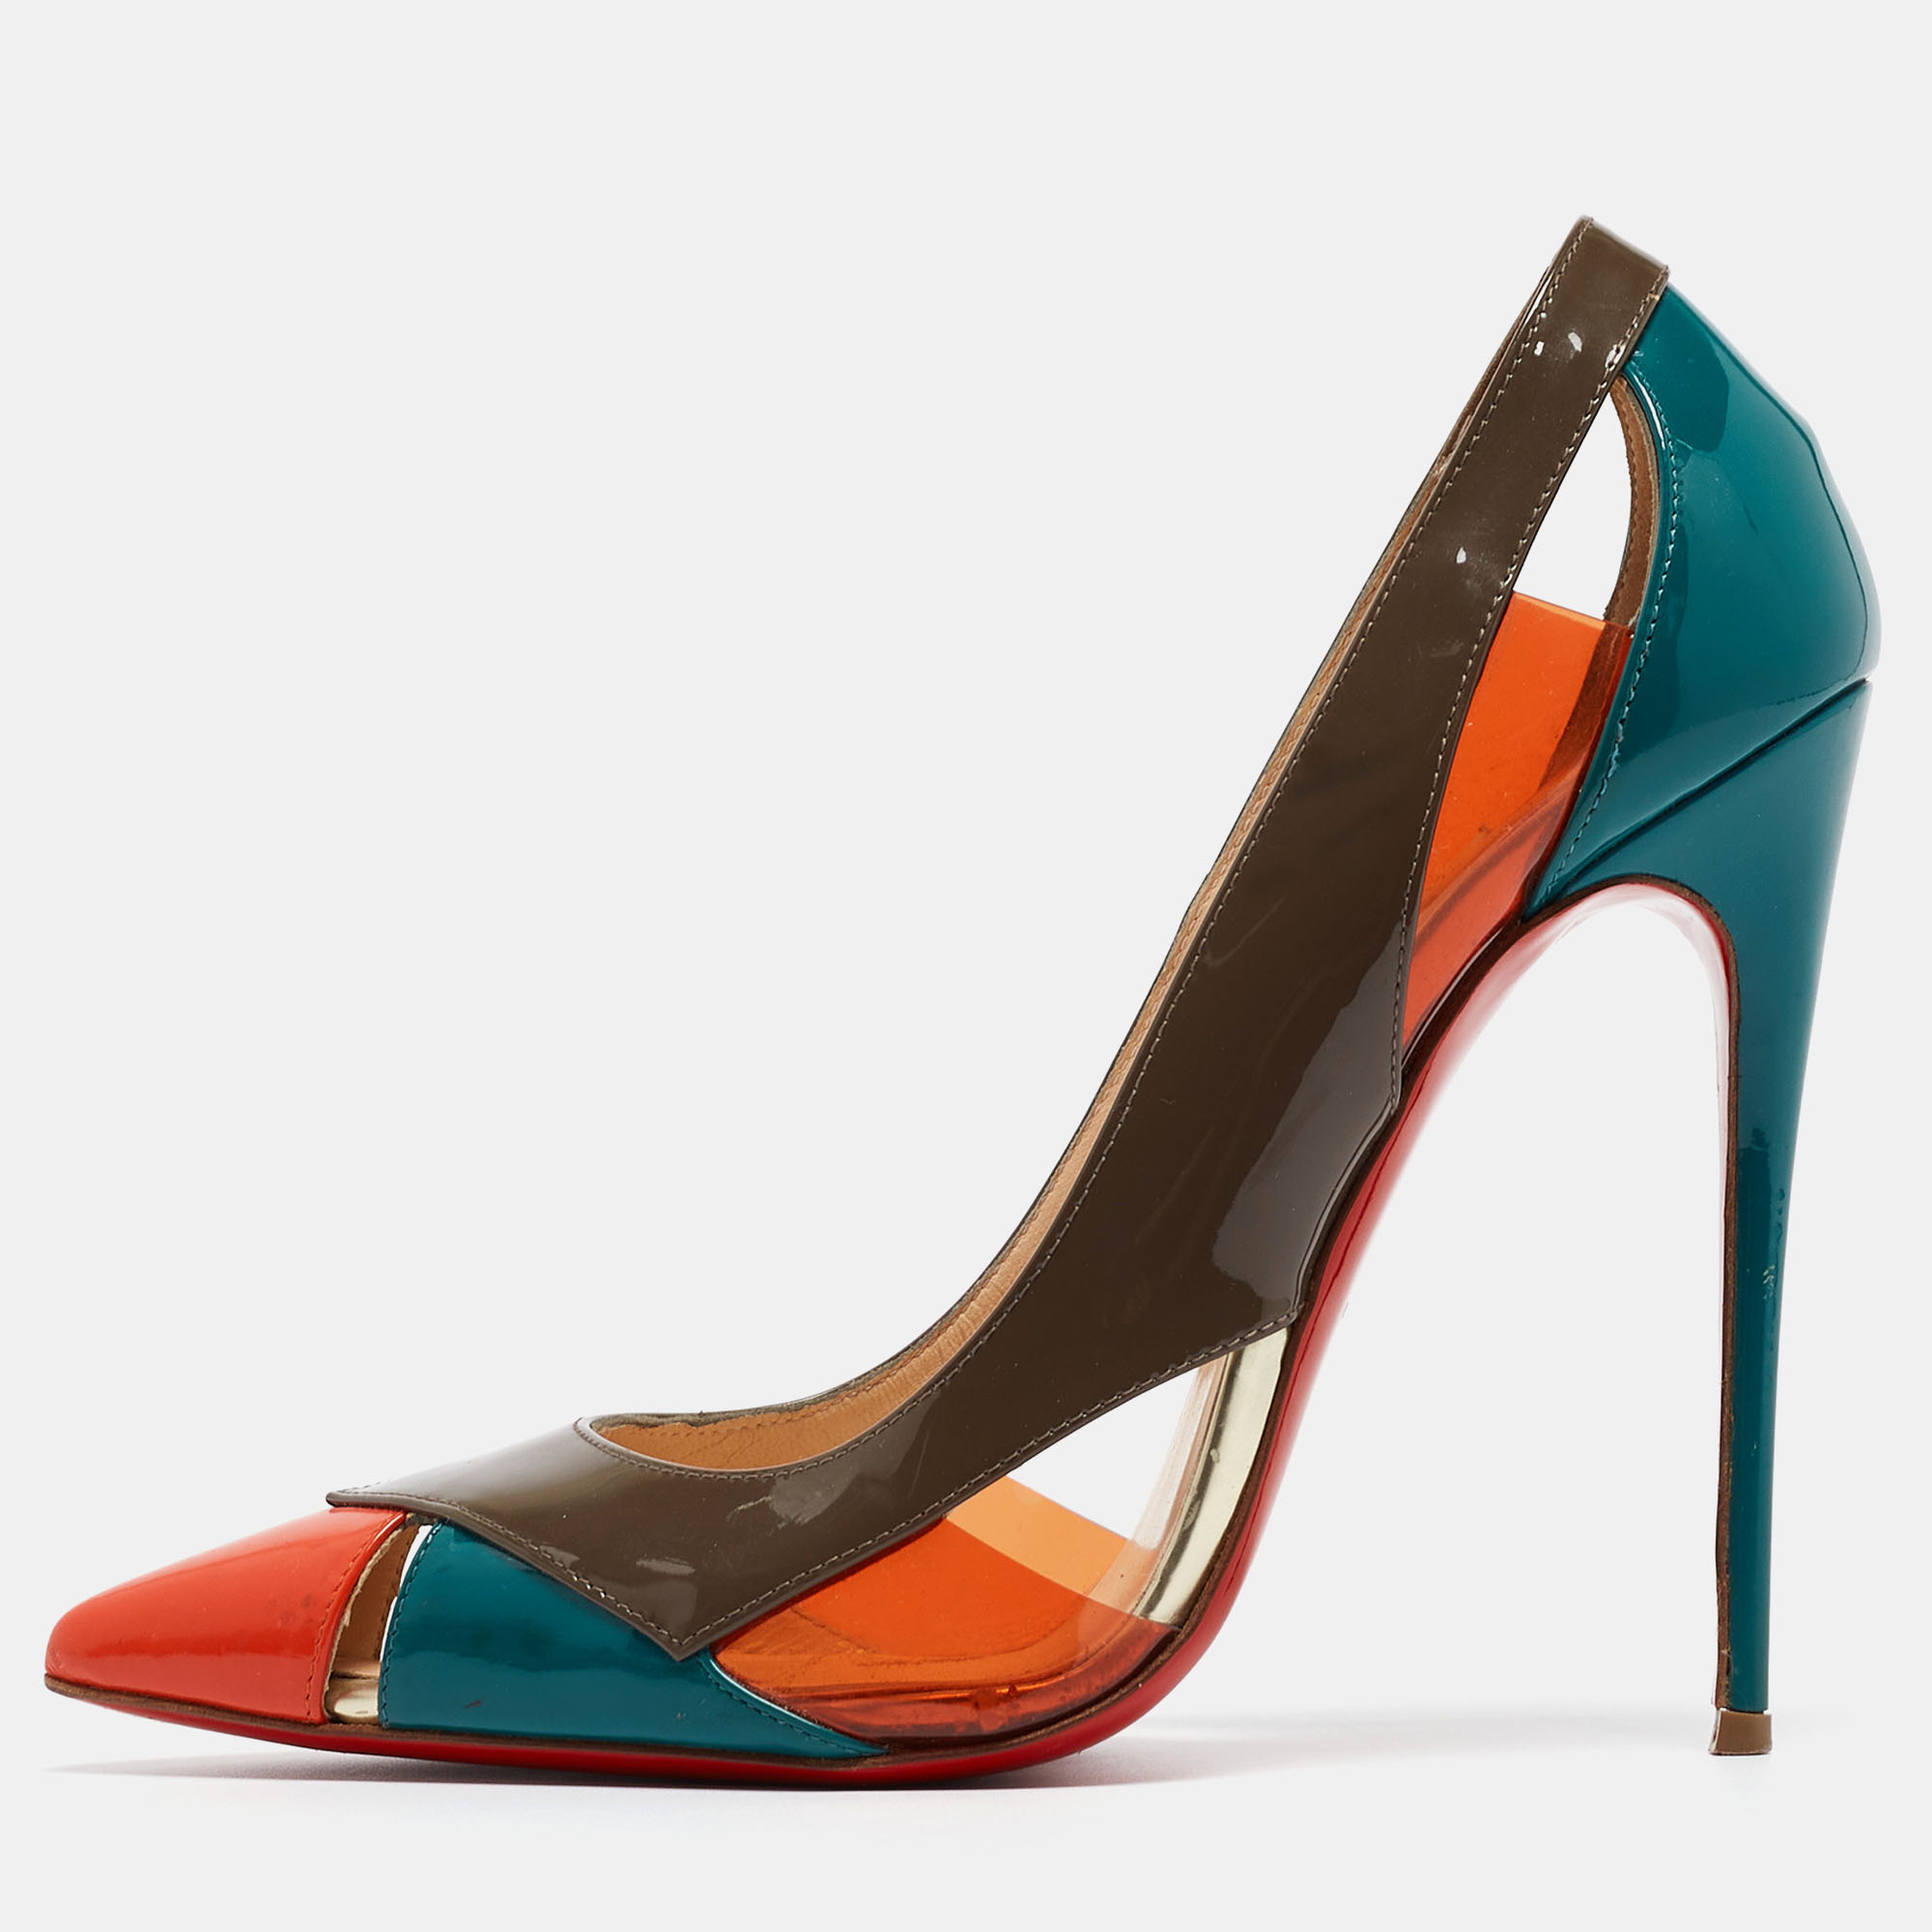 Christian louboutin tricolor patent and pvc galata pumps size 39